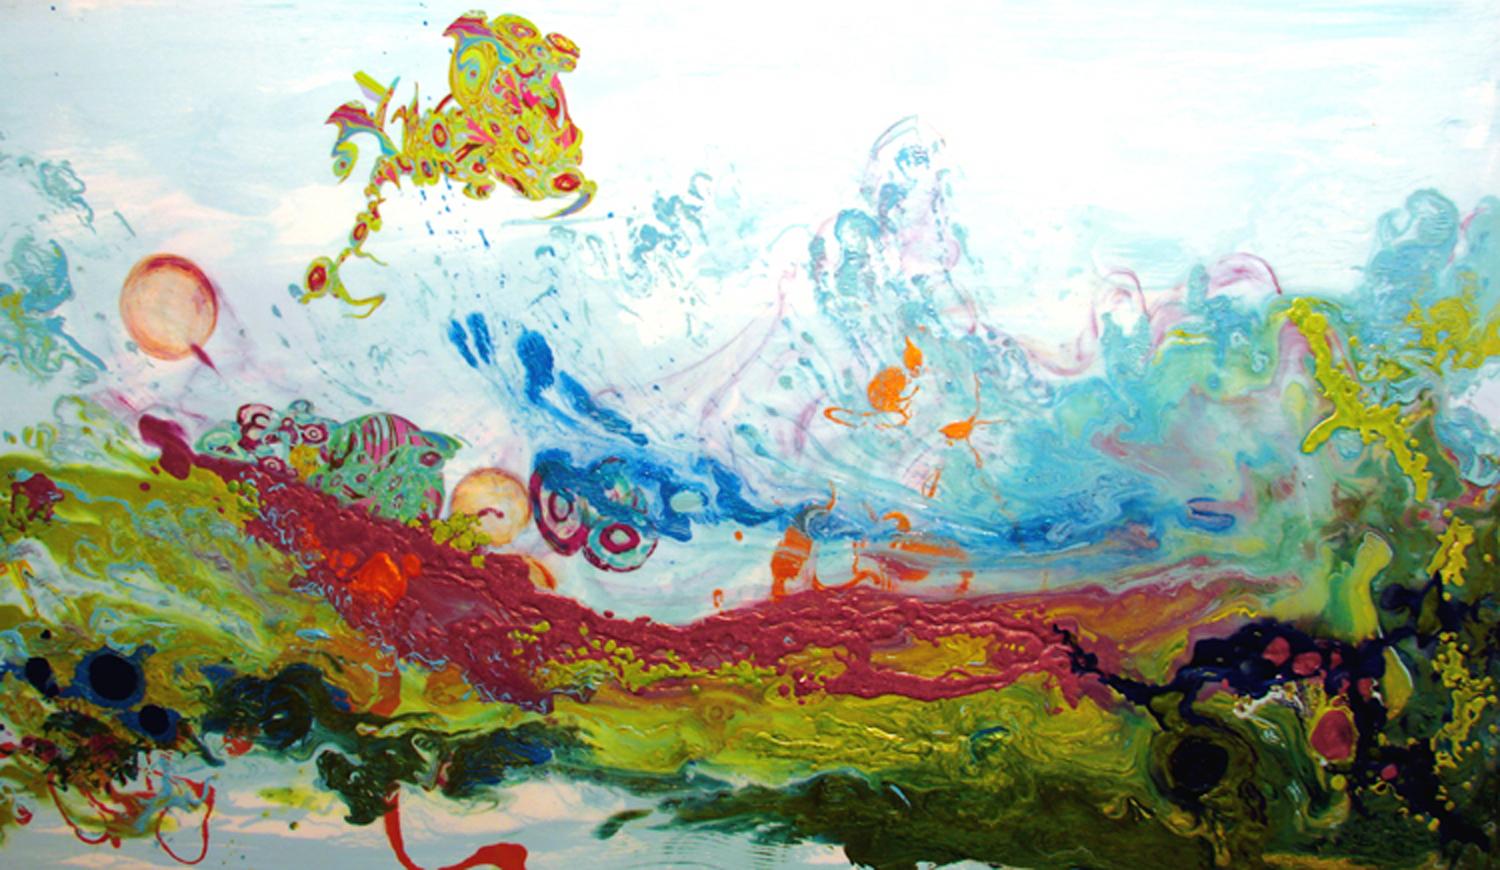 Liquid Landscape 060708, Waterscape, Mixed Media, Waves, Beach House, Colorful - Painting by Kimber Berry